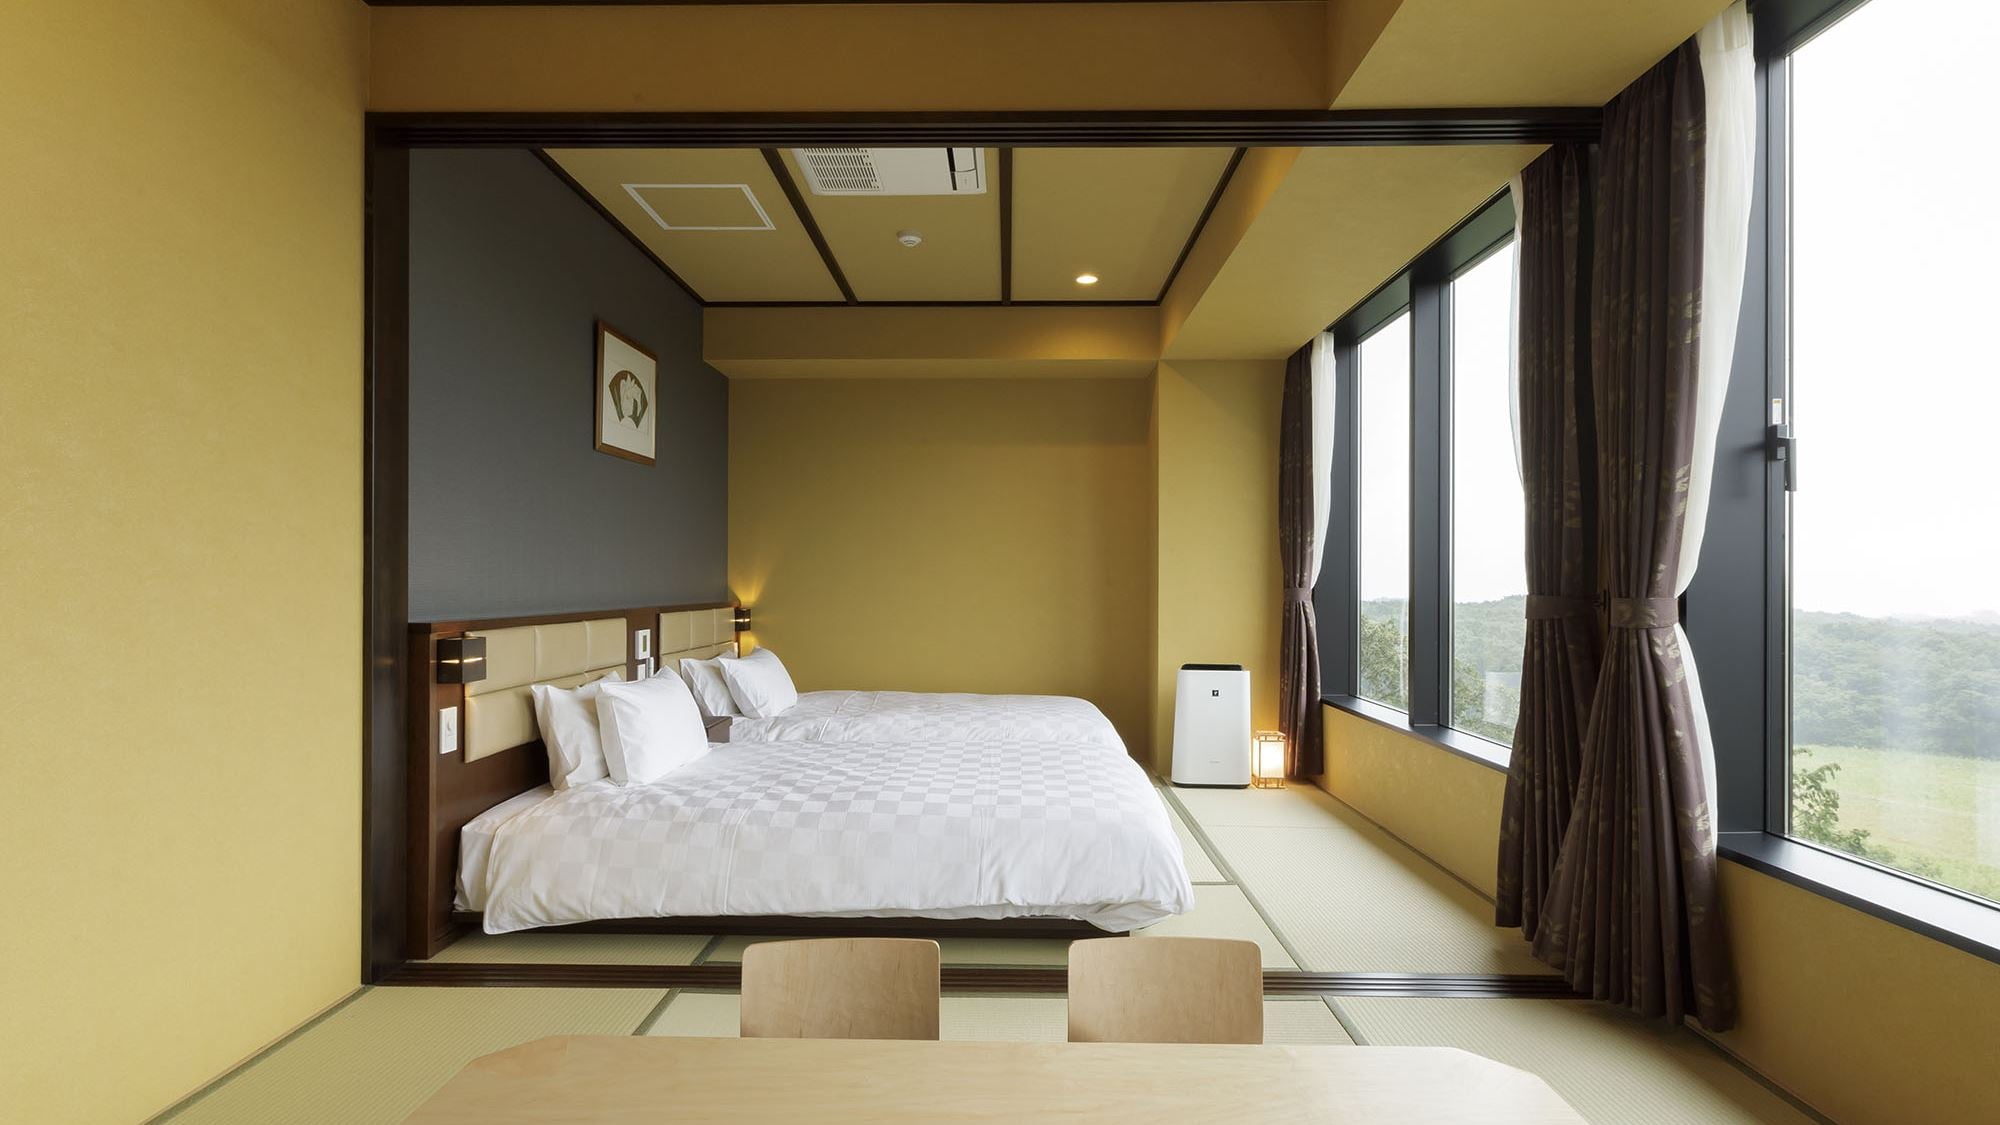 Superior A [Japanese-style room + Japanese-style room twin] A bedroom with two Japanese-style beds on a tatami-matted floor and a Japanese-style room with a continuous room.